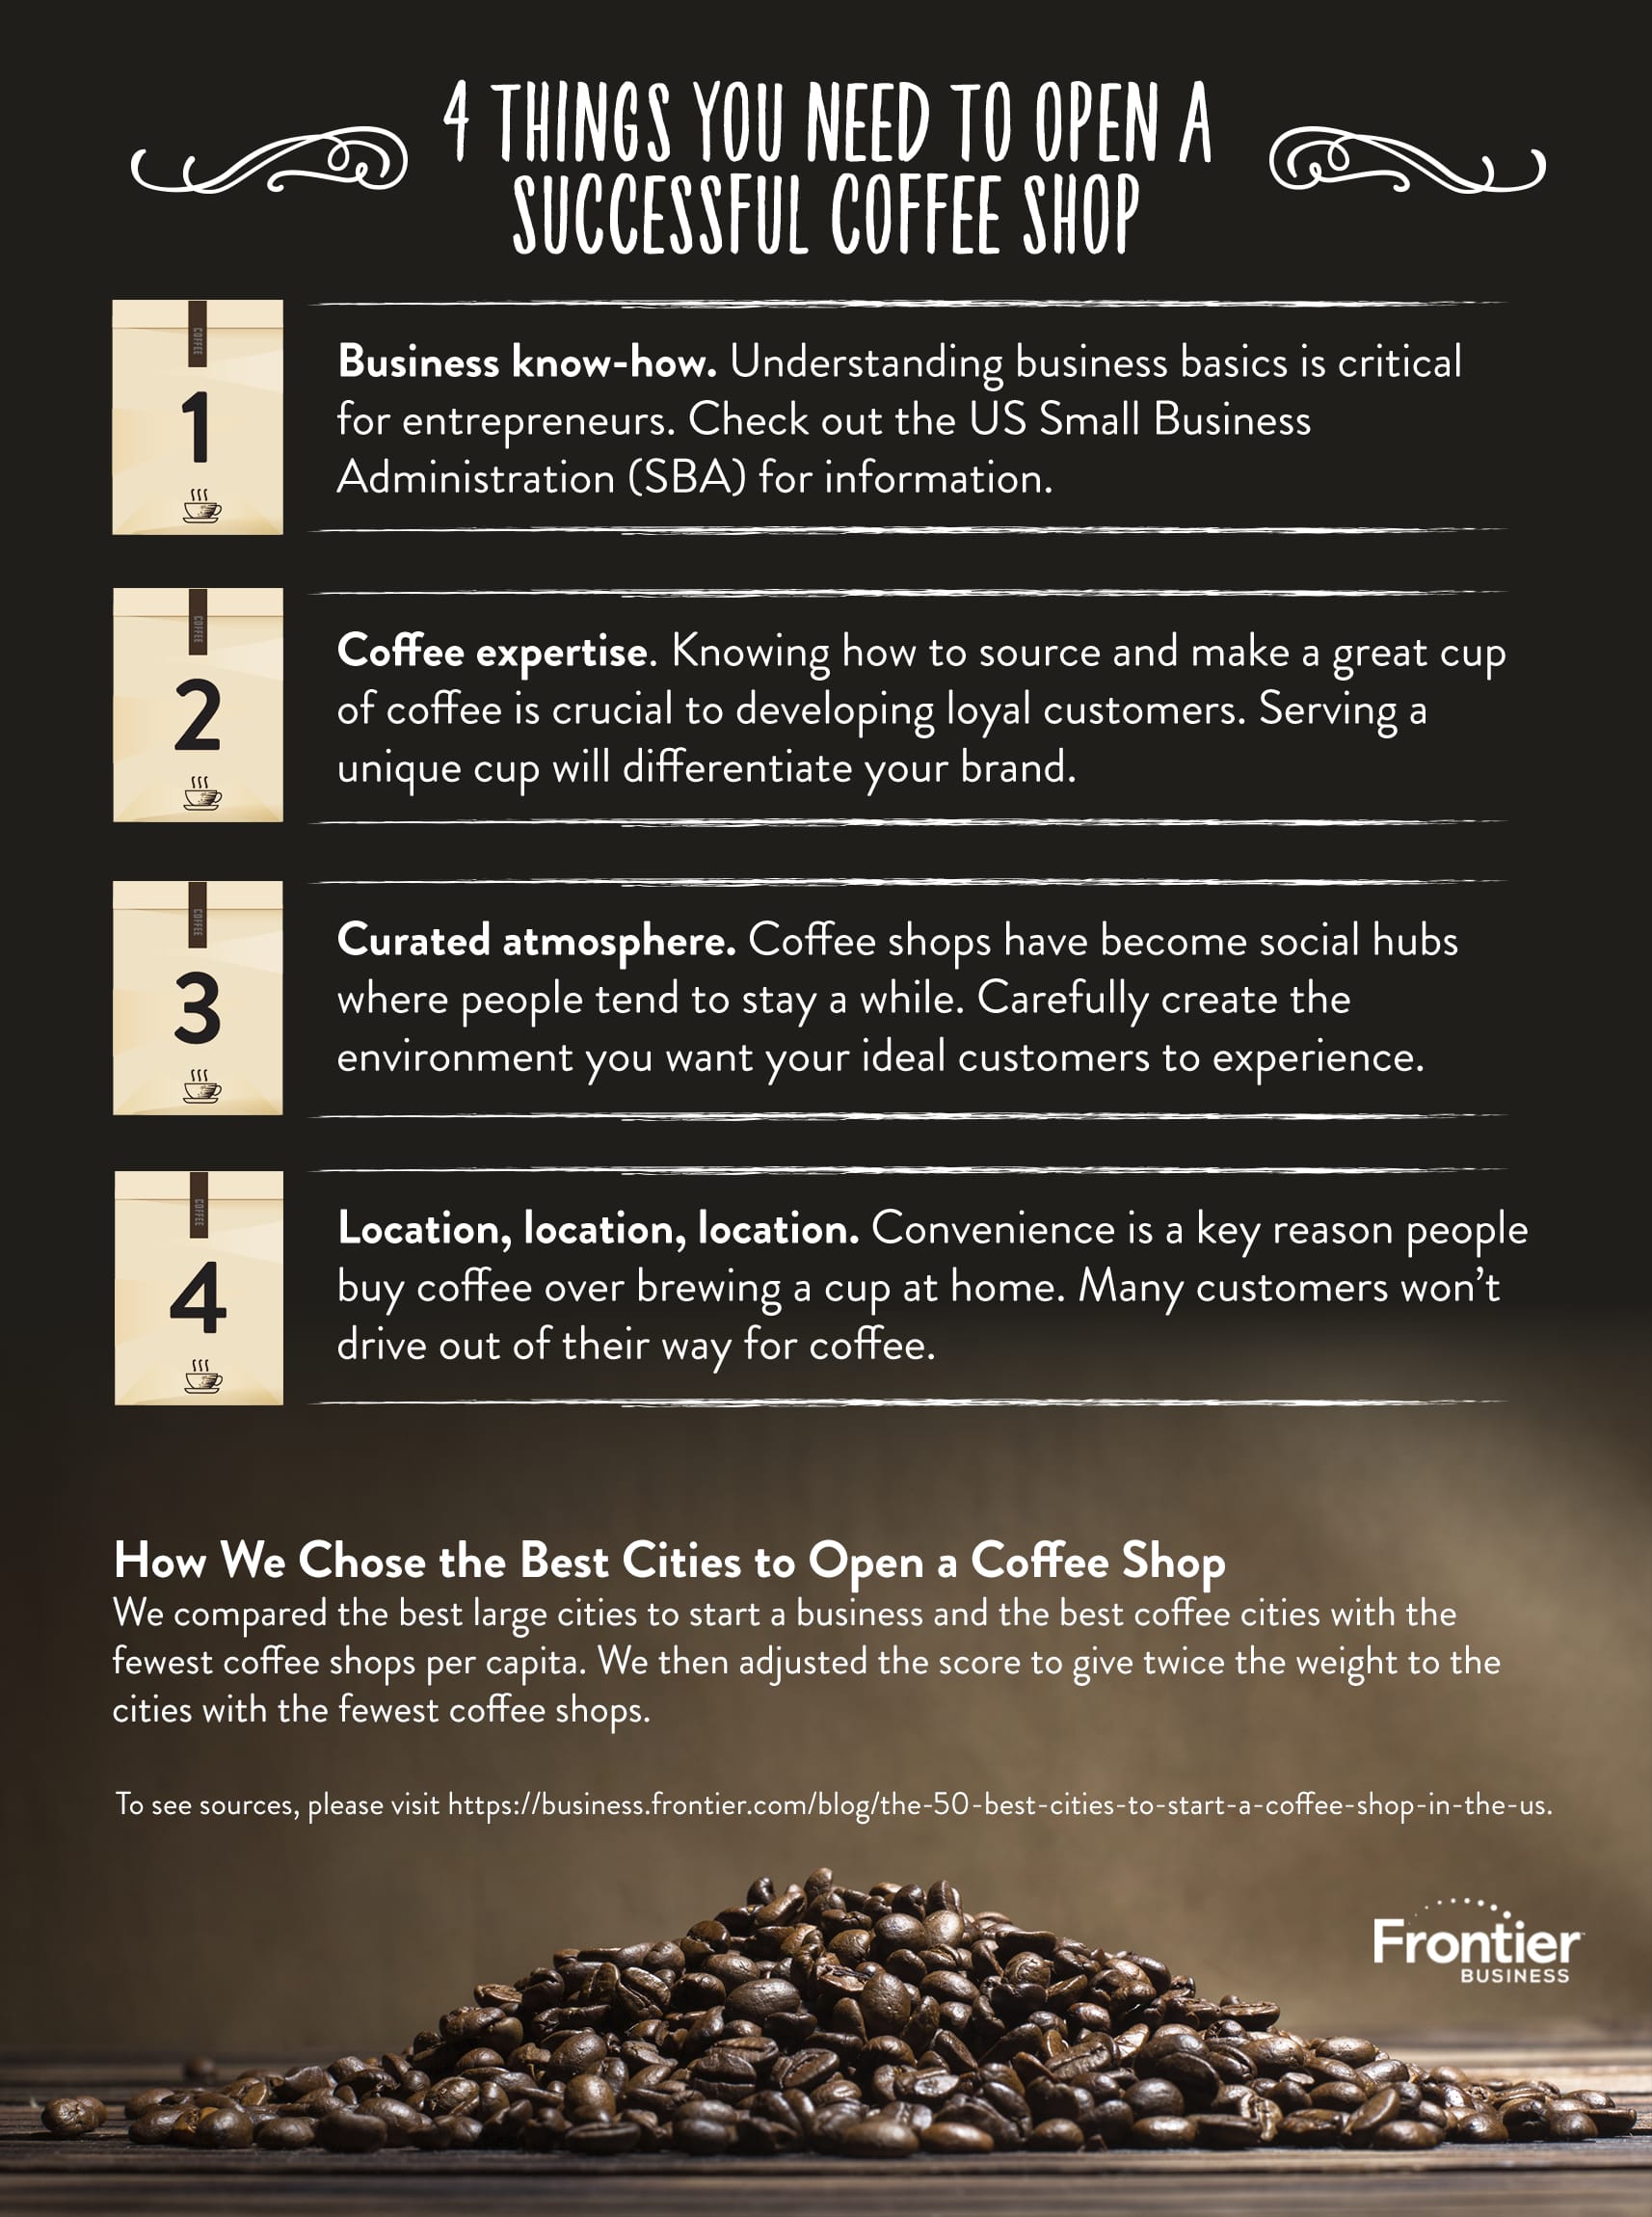 4 Tips for Opening a Successful Coffee Shop